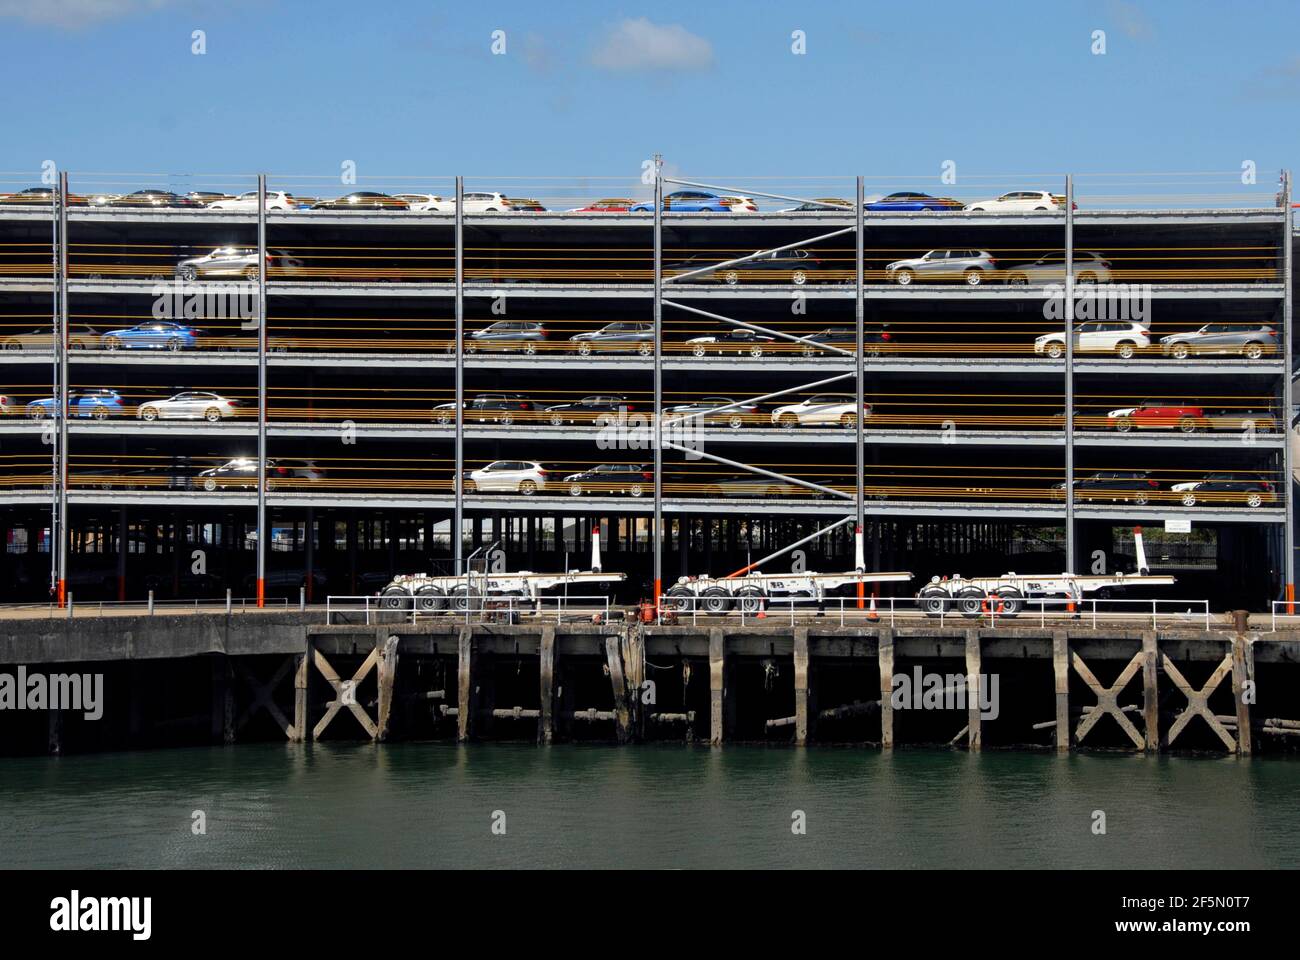 New cars awaiting export from the UK in a multi-storey car park, Southampton, Hampshire, England Stock Photo